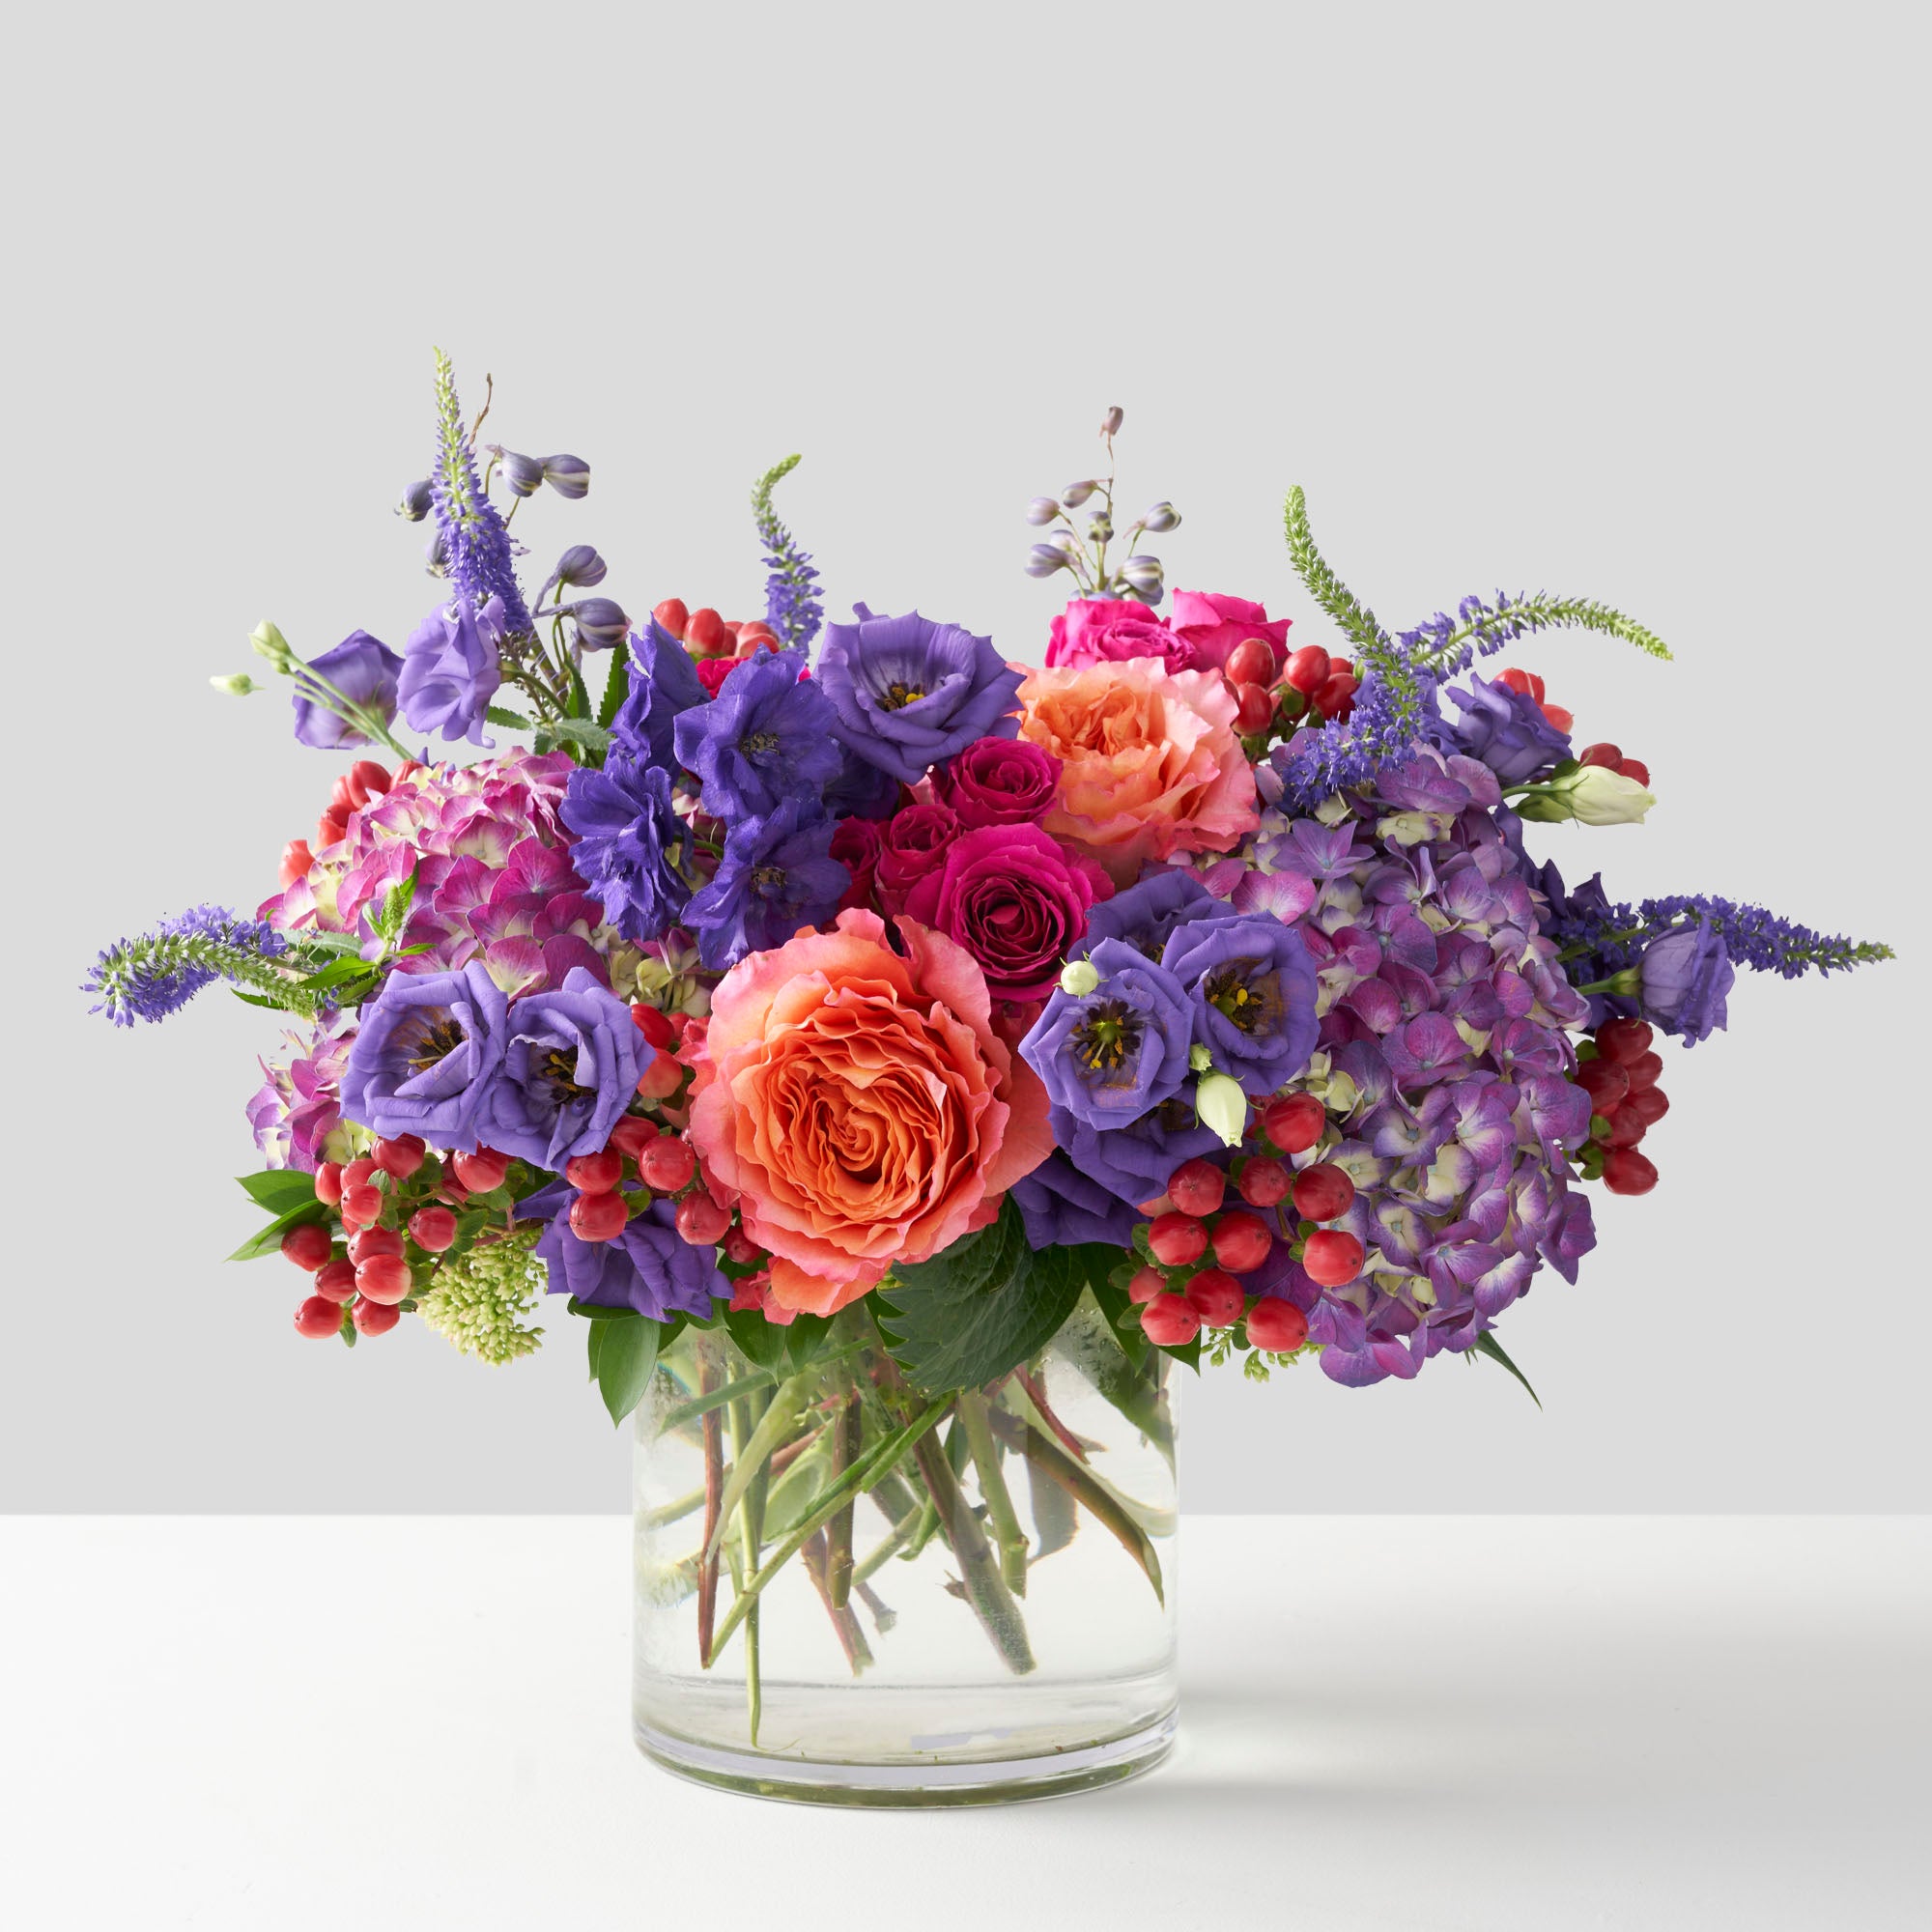 Clear glass vase filed with orange Freespirit roses, purple lisianthus, purple hydrangea, hot pink spray roses, purple veronica and red hypericum berries.